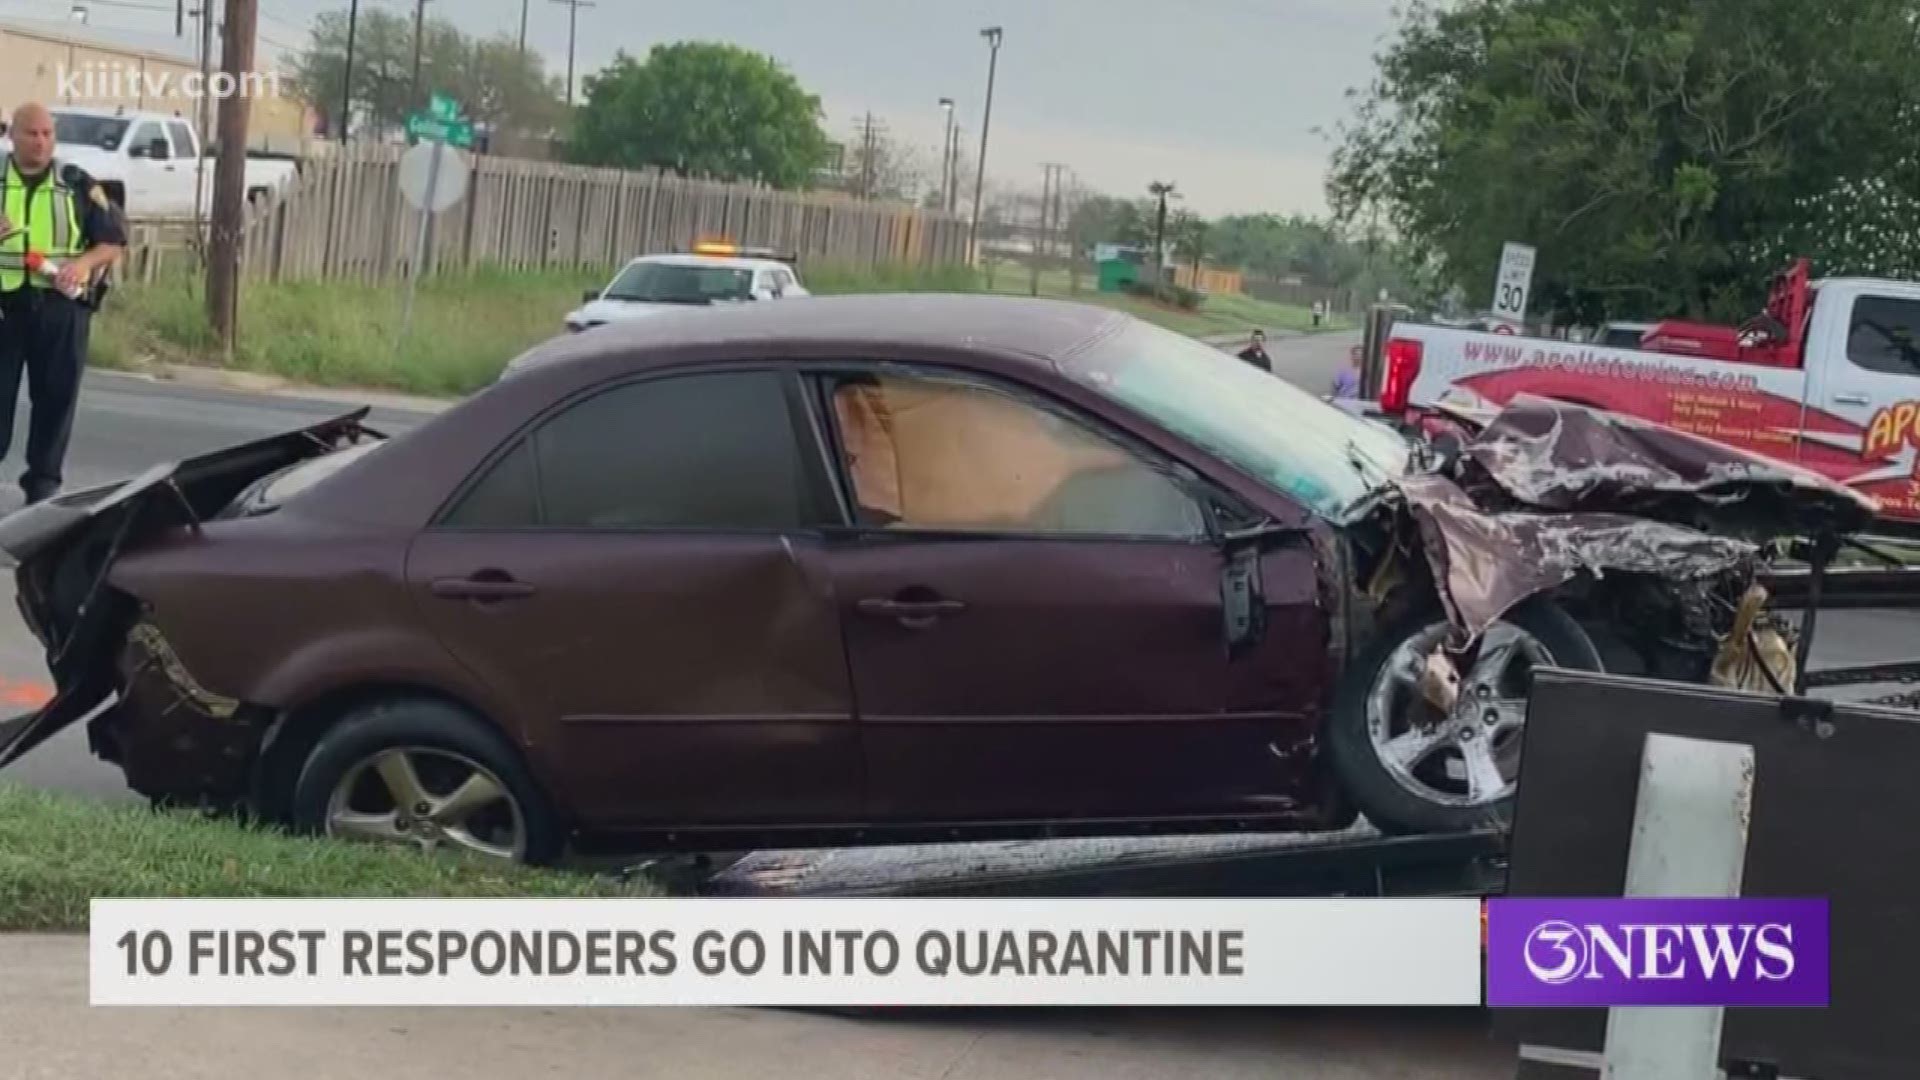 First responders asked to quarantine after responding to an accident this morning.